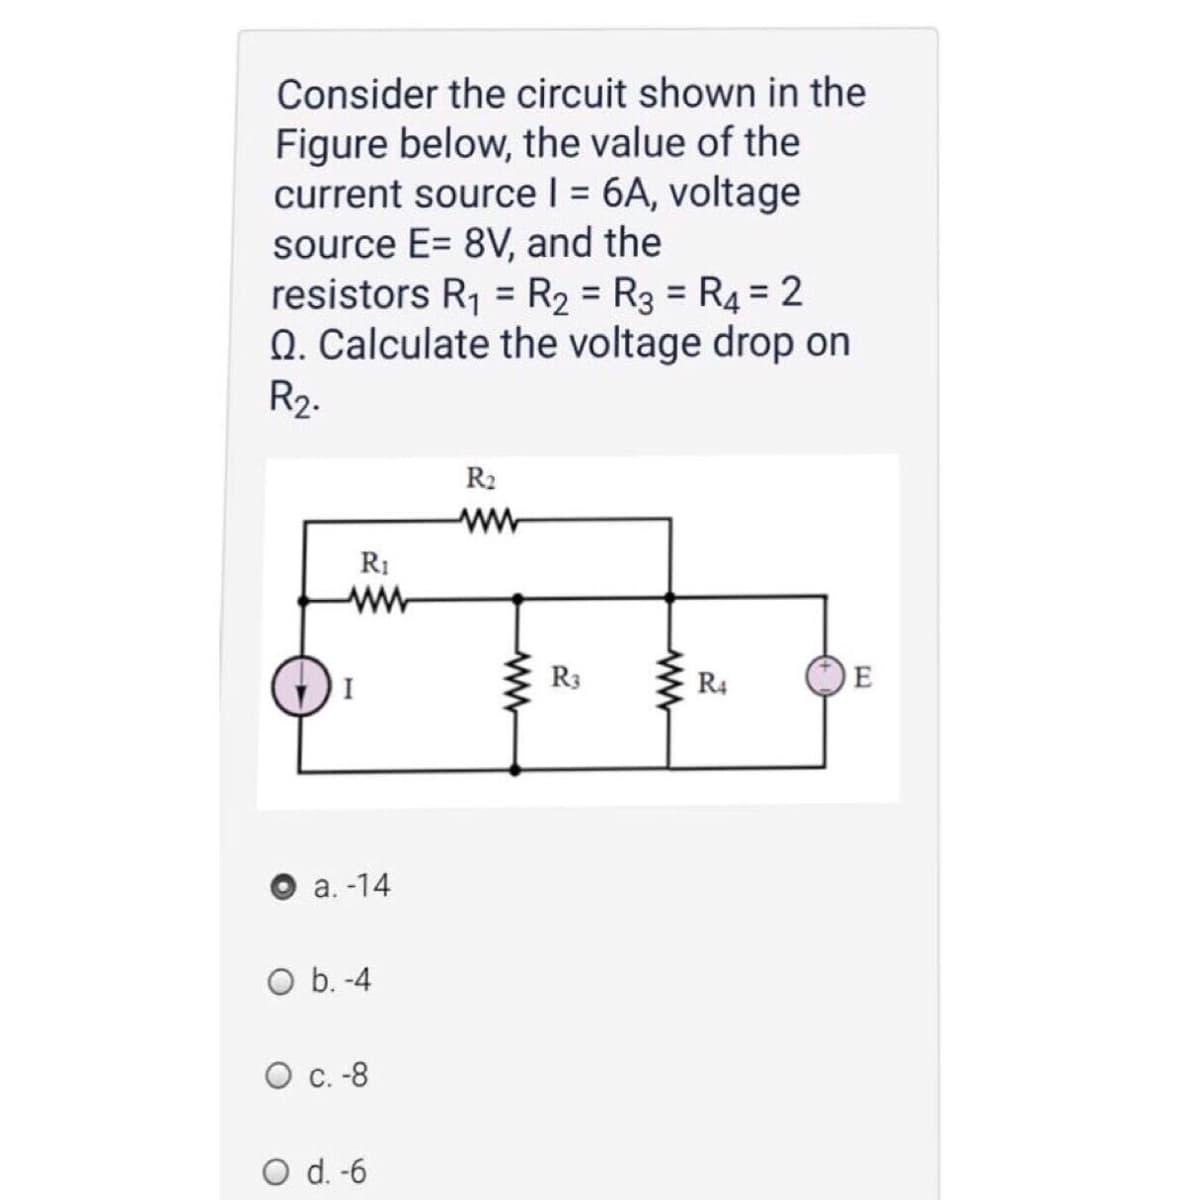 Consider the circuit shown in the
Figure below, the value of the
current source I = 6A, voltage
source E= 8V, and the
resistors R1 = R2 = R3 = R4= 2
Q. Calculate the voltage drop on
R2.
R2
ww
R1
ww-
I
R3
R4
E
а. -14
O b. -4
О с.-8
O d. -6
